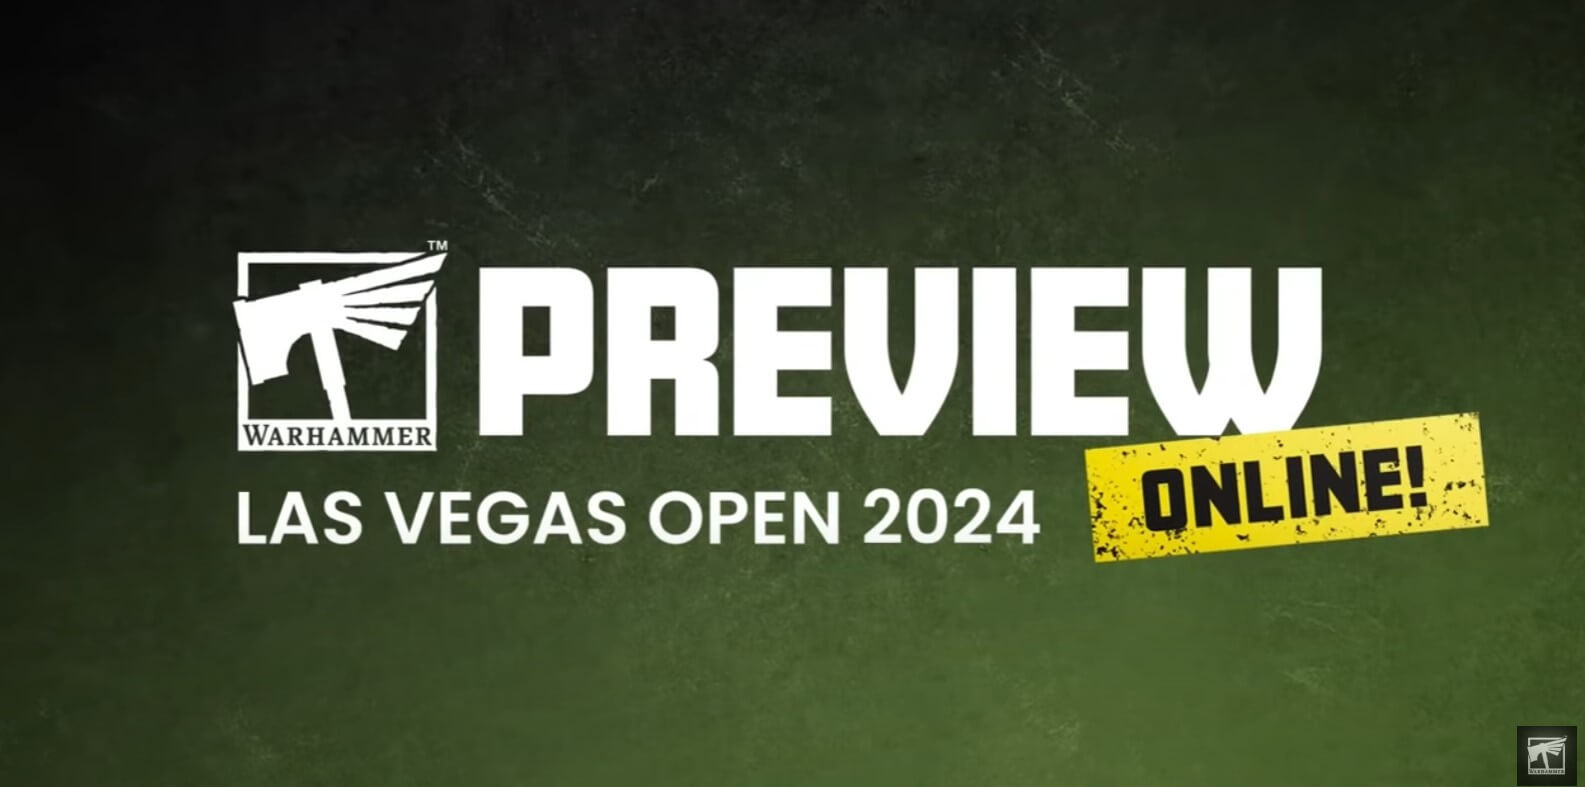 Anticipation Builds for the Las Vegas Open 2024 Warhammer Preview